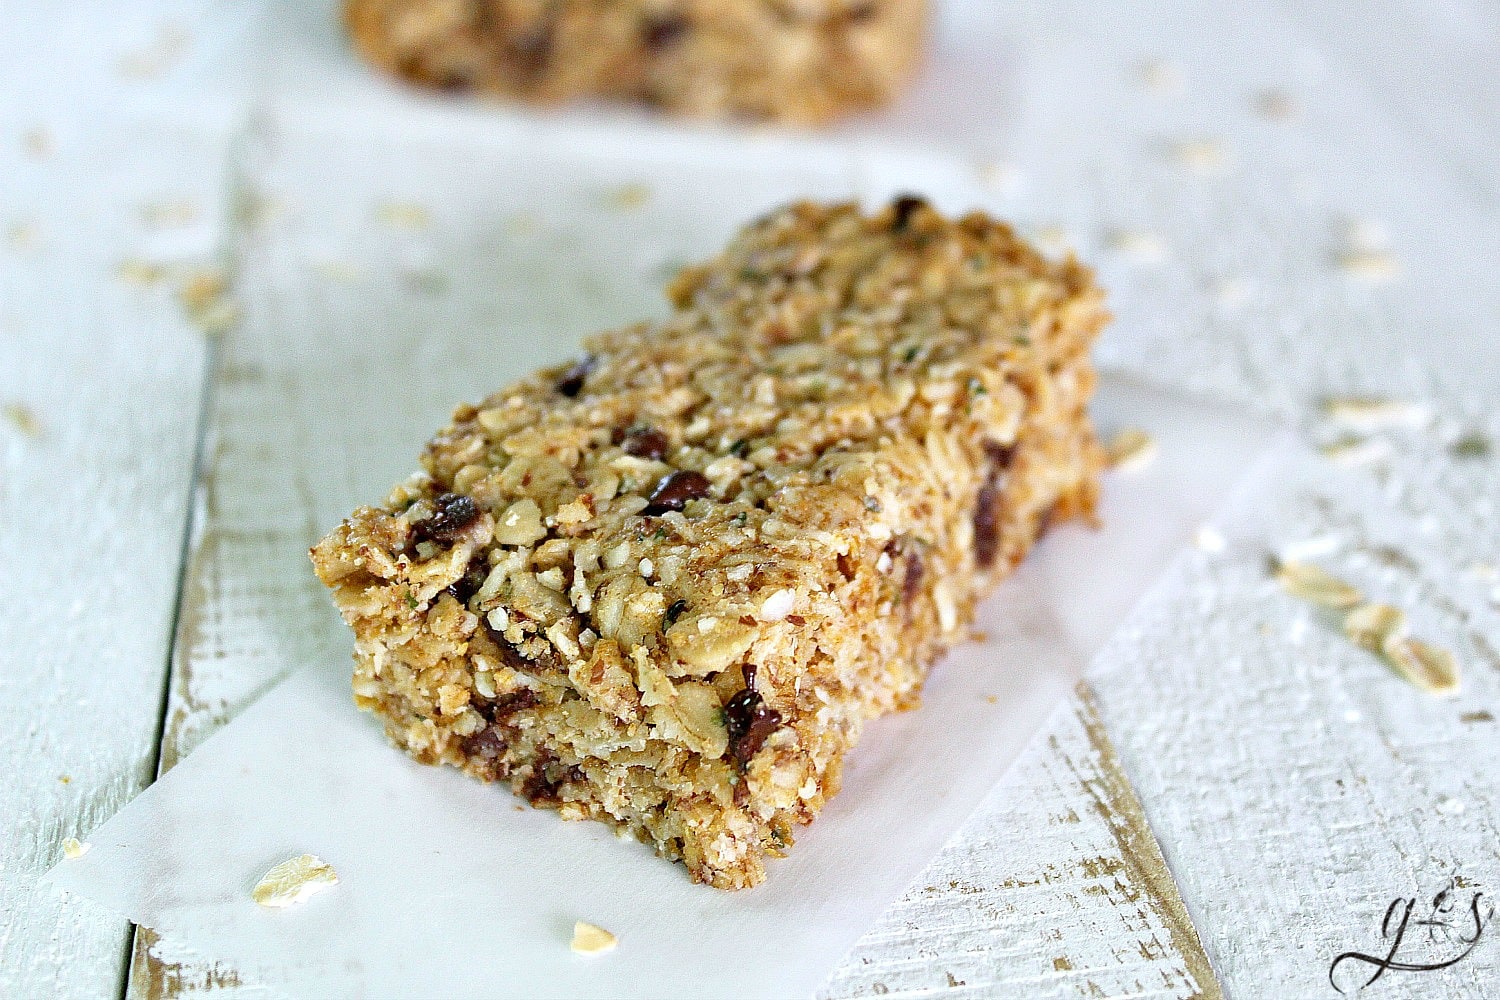 These Fit & Frugal Granola Bars are made with healthy gluten free ingredients to create chewy granola bars you feel good about feeding your kids. This homemade recipe is a perfect snack or addition to any school lunch. They are packed with superfoods like ground flax seeds, hemp seeds and coconut! But any add-ins will work! We never skip the chocolate chips but the possibilities are endless. Look no further, you have found the BEST granola bar recipe on Pinterest!